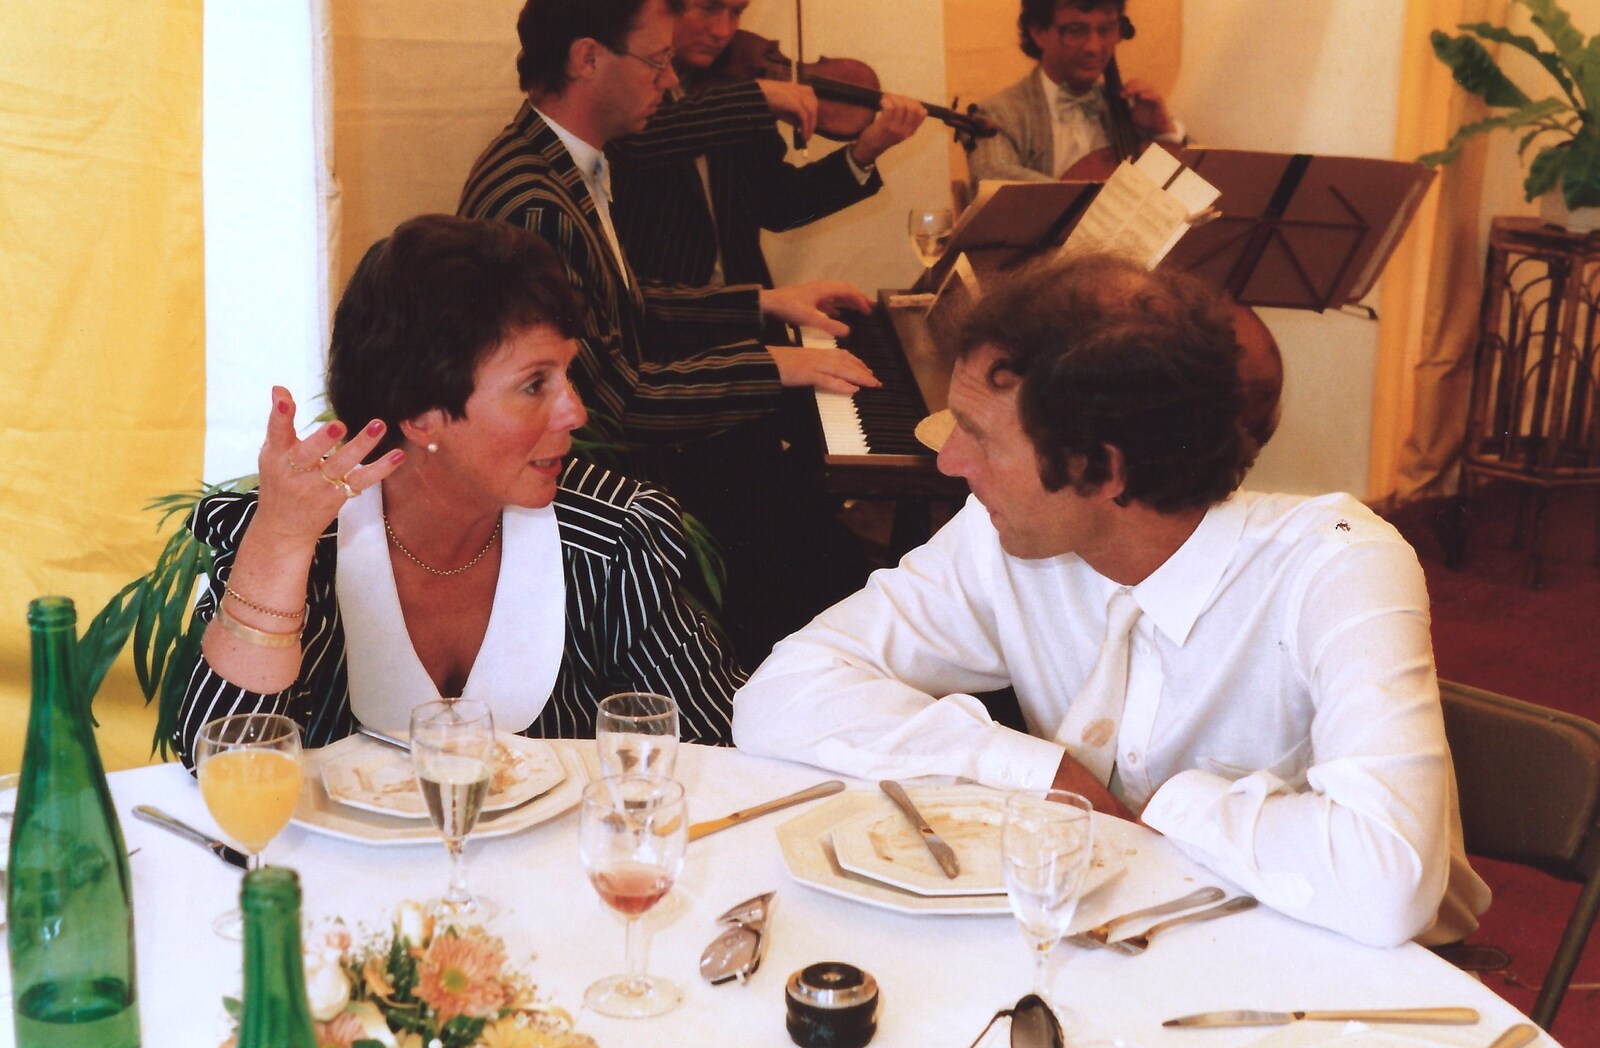 Judith and Mike have a chat from Mother and Mike's Wedding Reception, Bransgore, Dorset - 20th August 1988